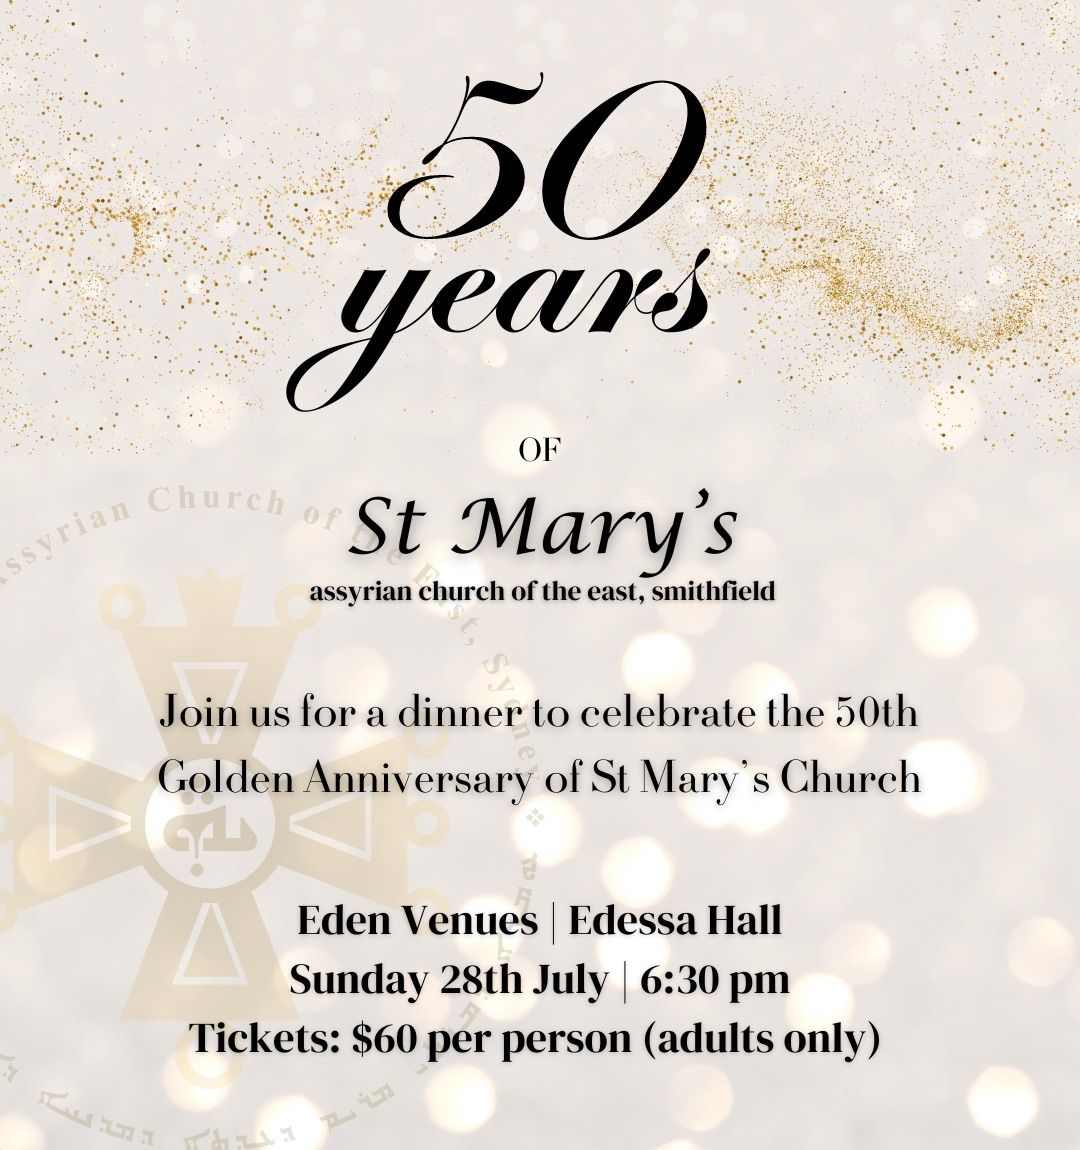 Golden Anniversary Celebration of St. Mary's Assyrian Church of the East